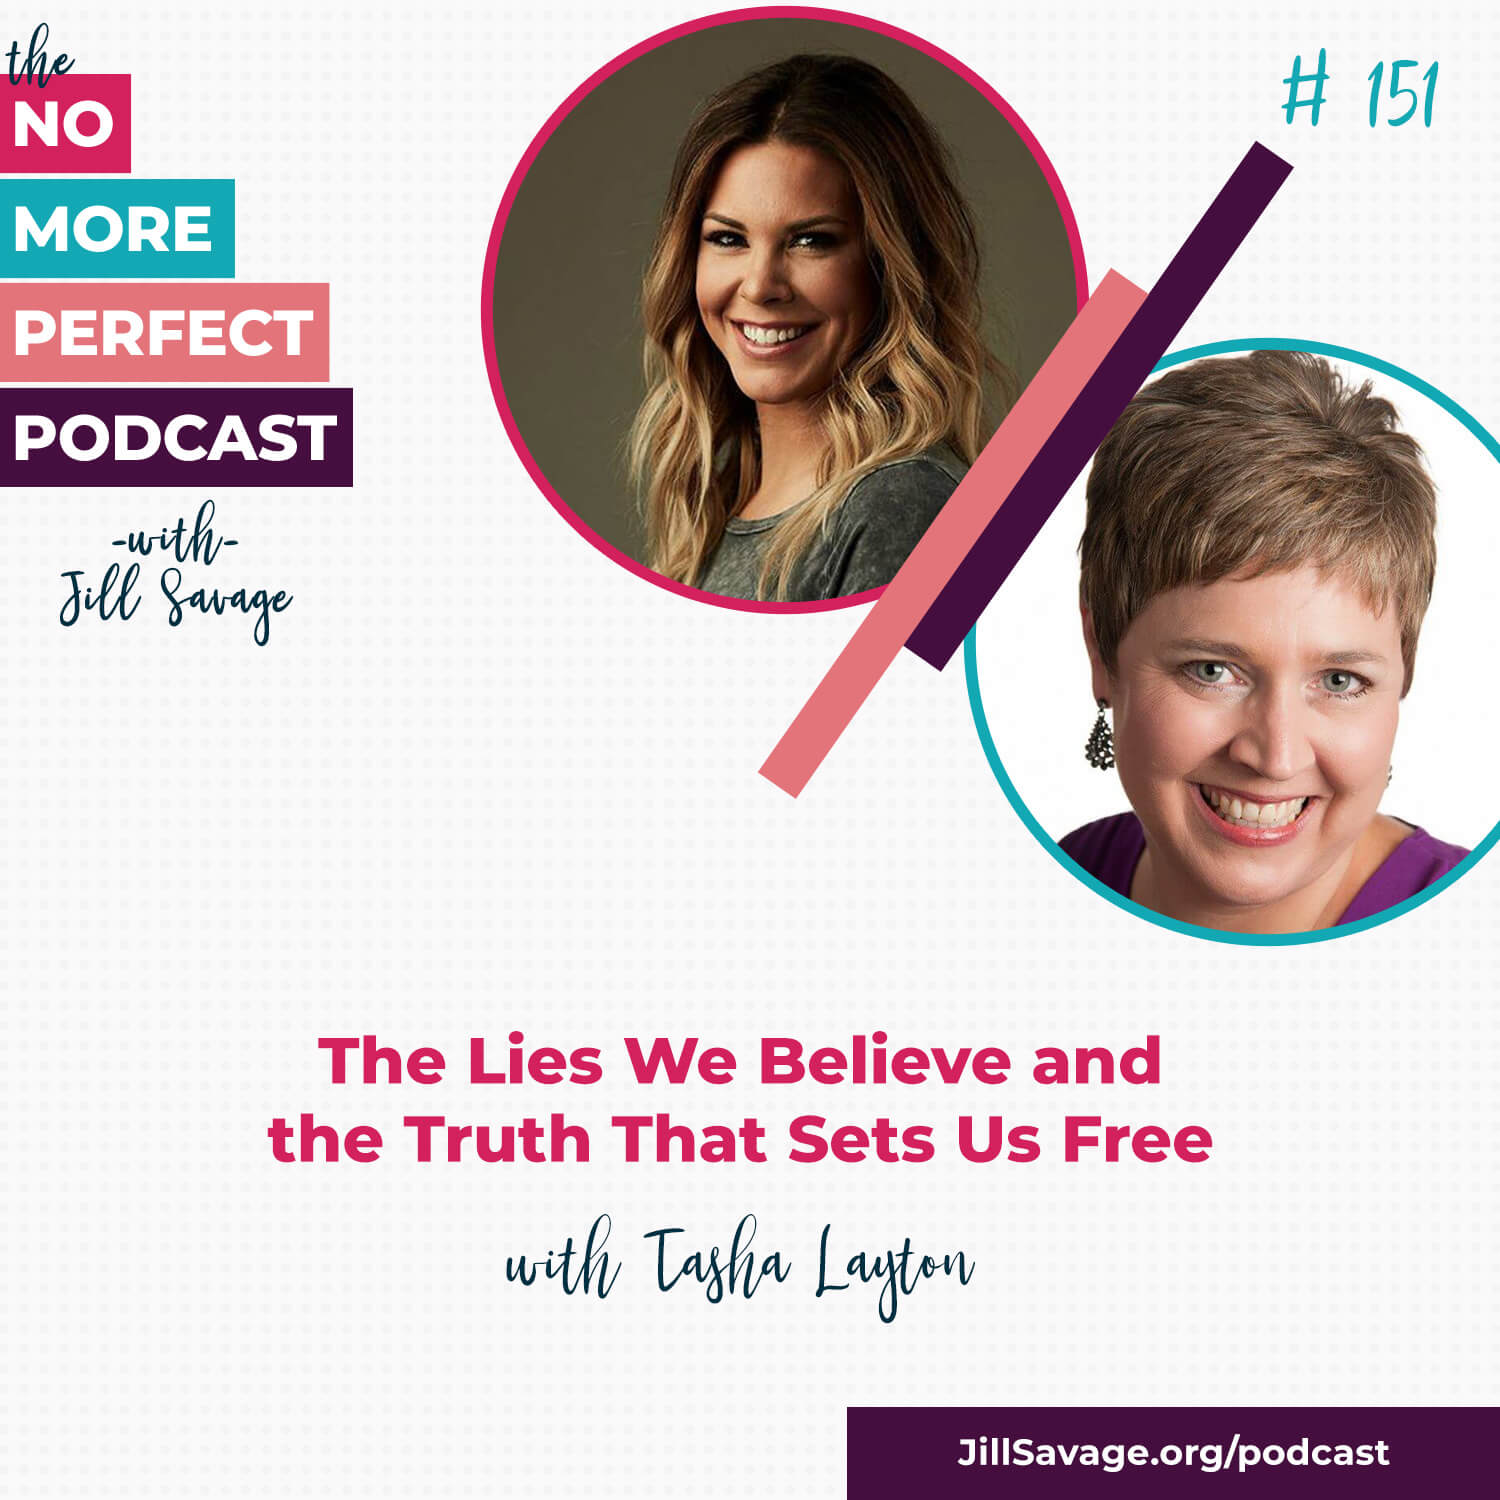 The Lies We Believe and the Truth That Sets Us Free with Tasha Layton | Episode 151